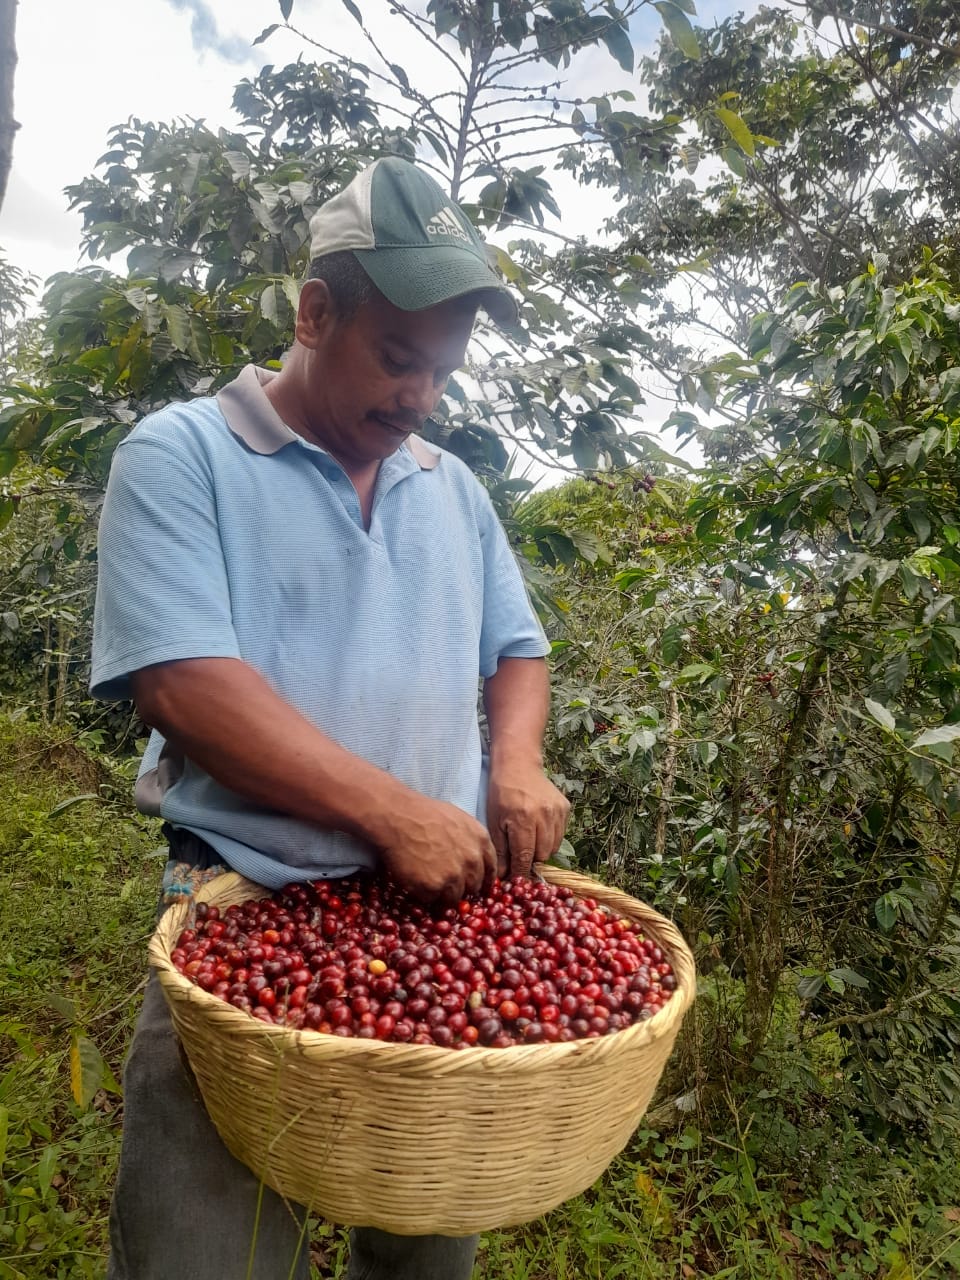 Coffee cherries are picked into baskets